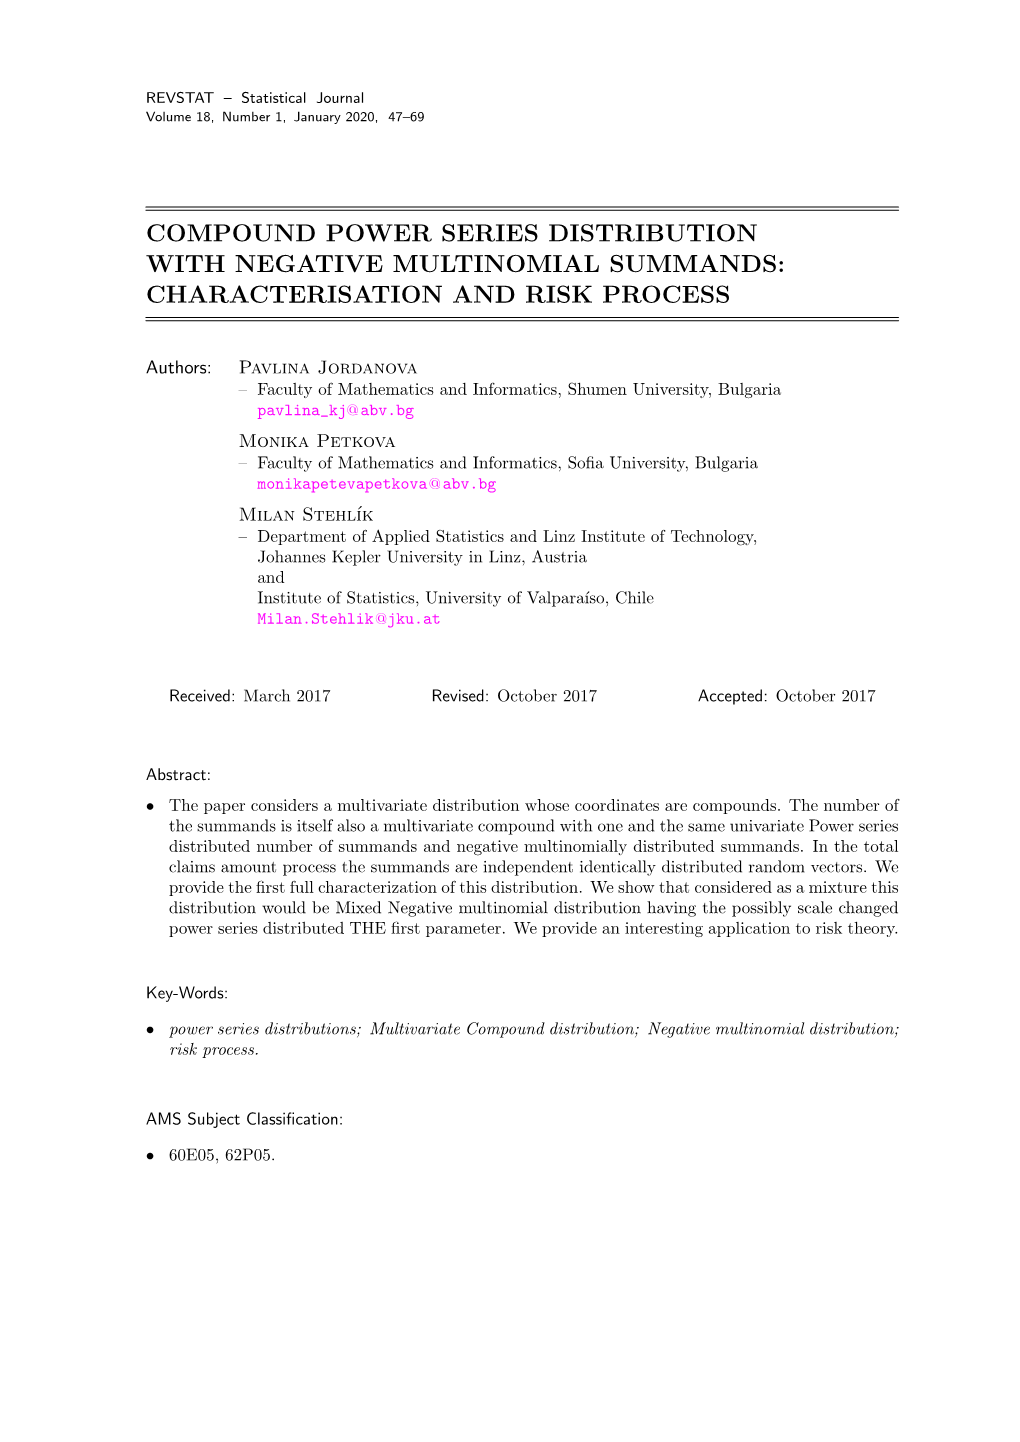 Compound Power Series Distribution with Negative Multinomial Summands: Characterisation and Risk Process